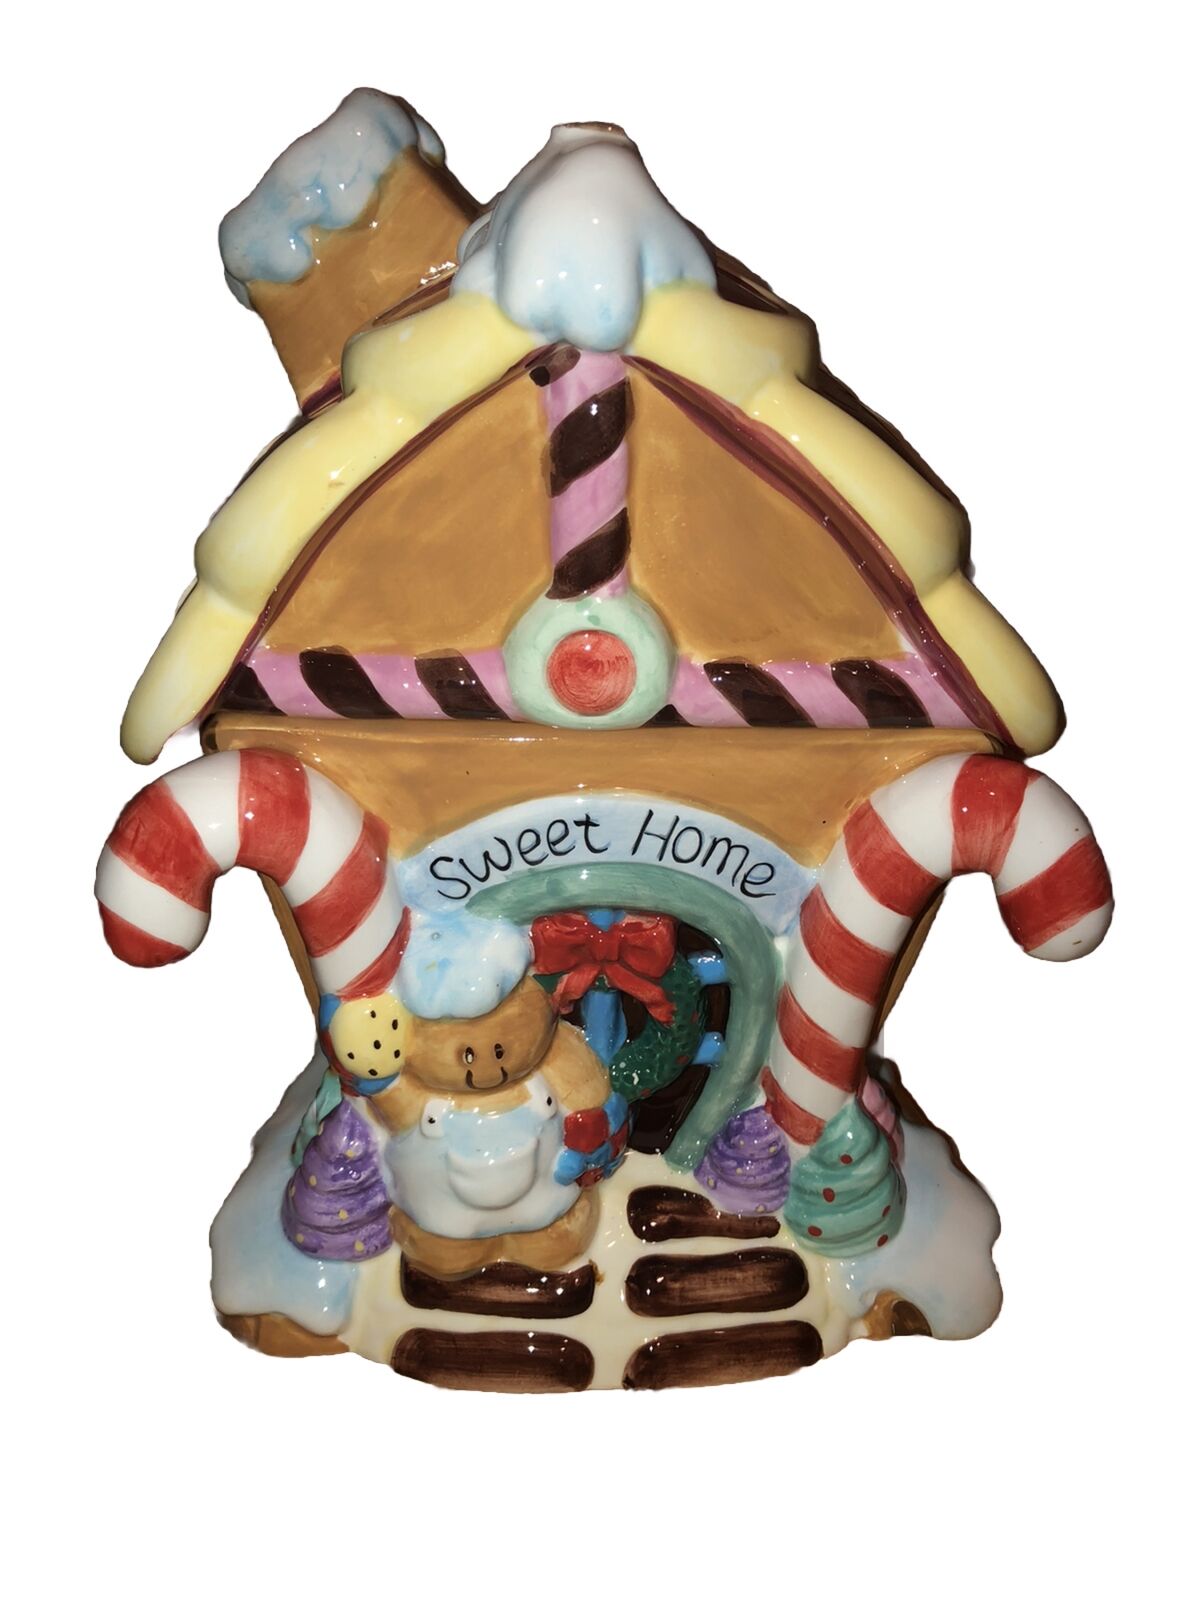 Adorable Ceramic Christmas Gingerbread House And Man Cookie Jar ￼ Fun